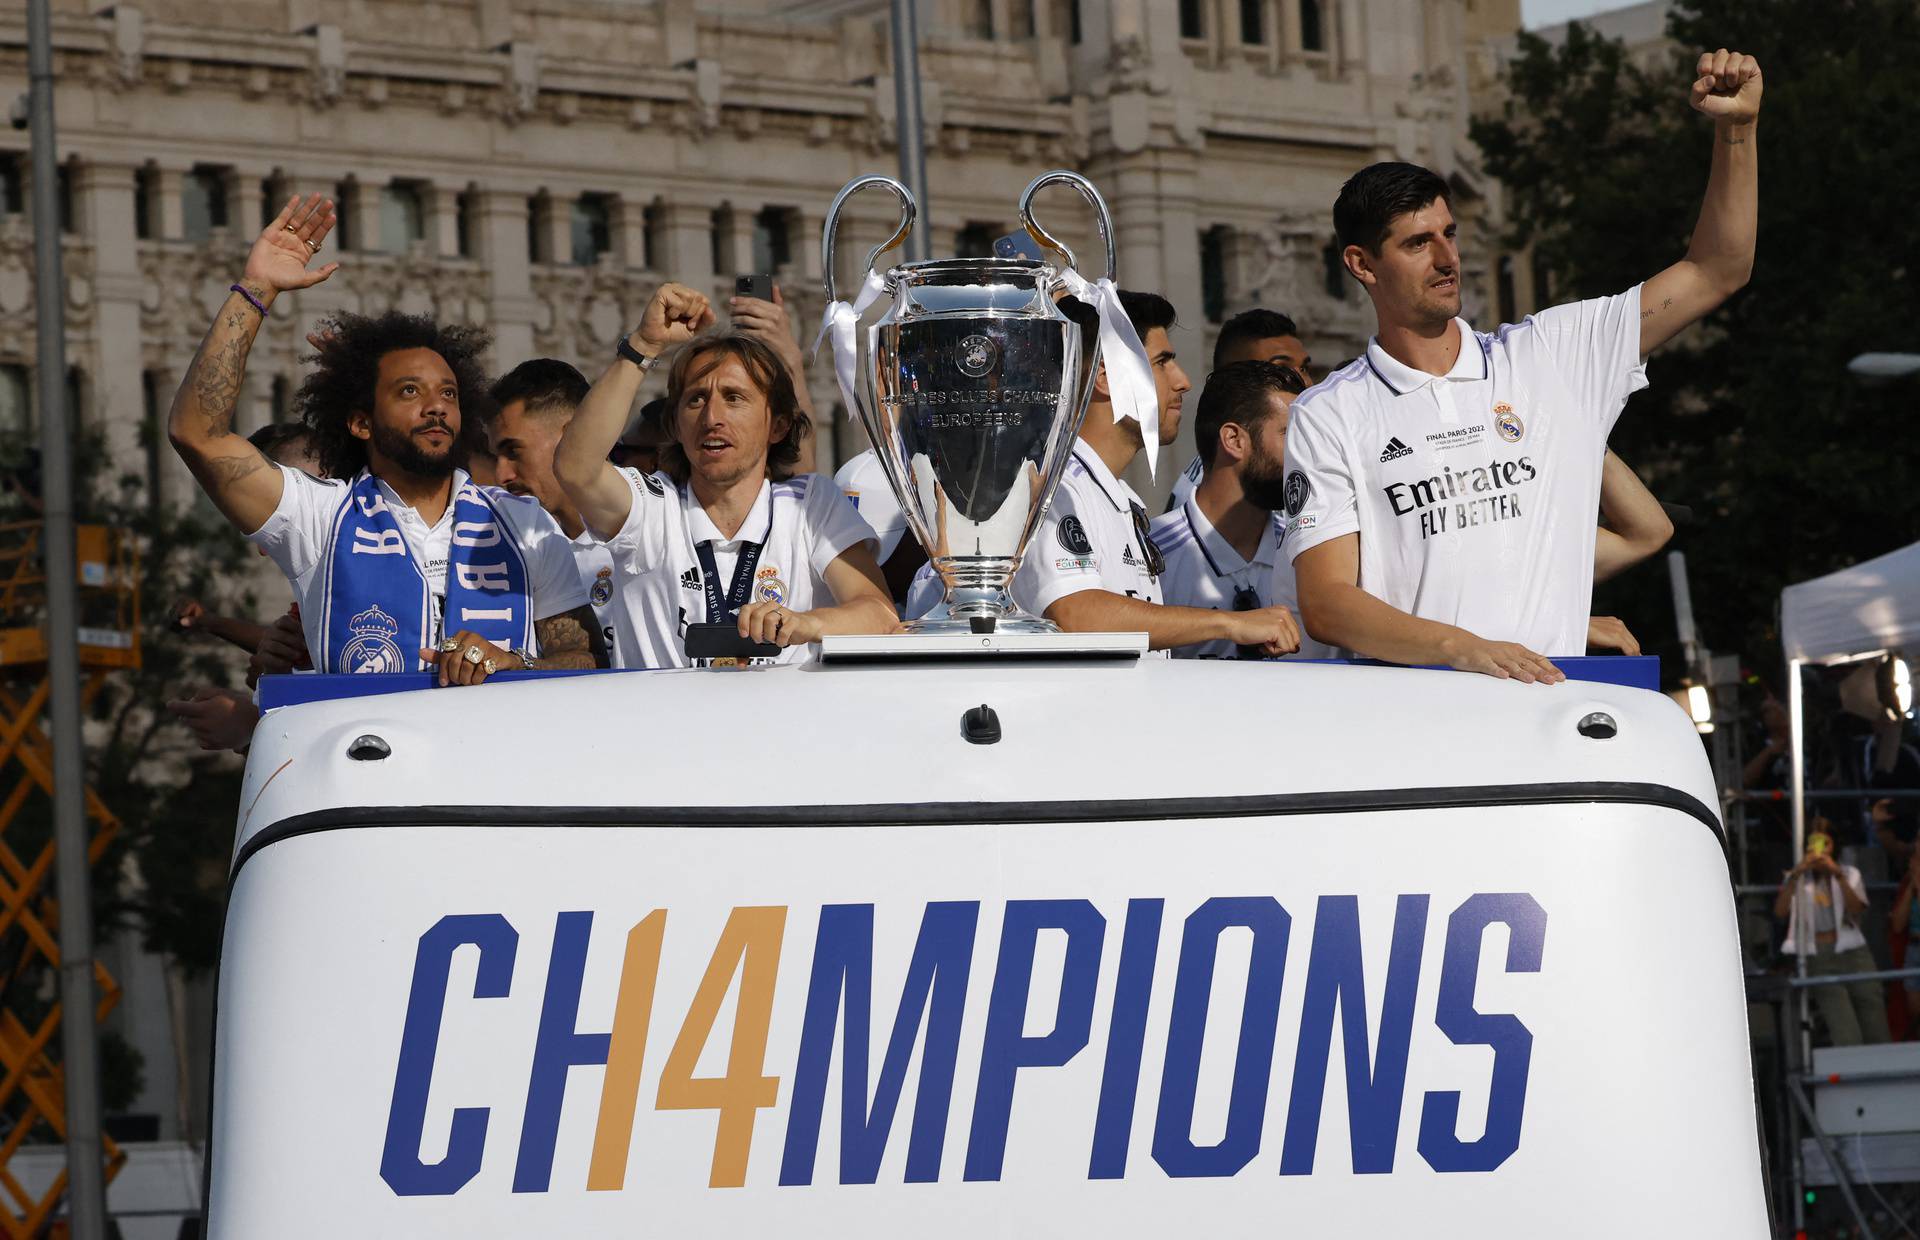 Real Madrid celebrate winning the Champions League Final with an open top bus parade